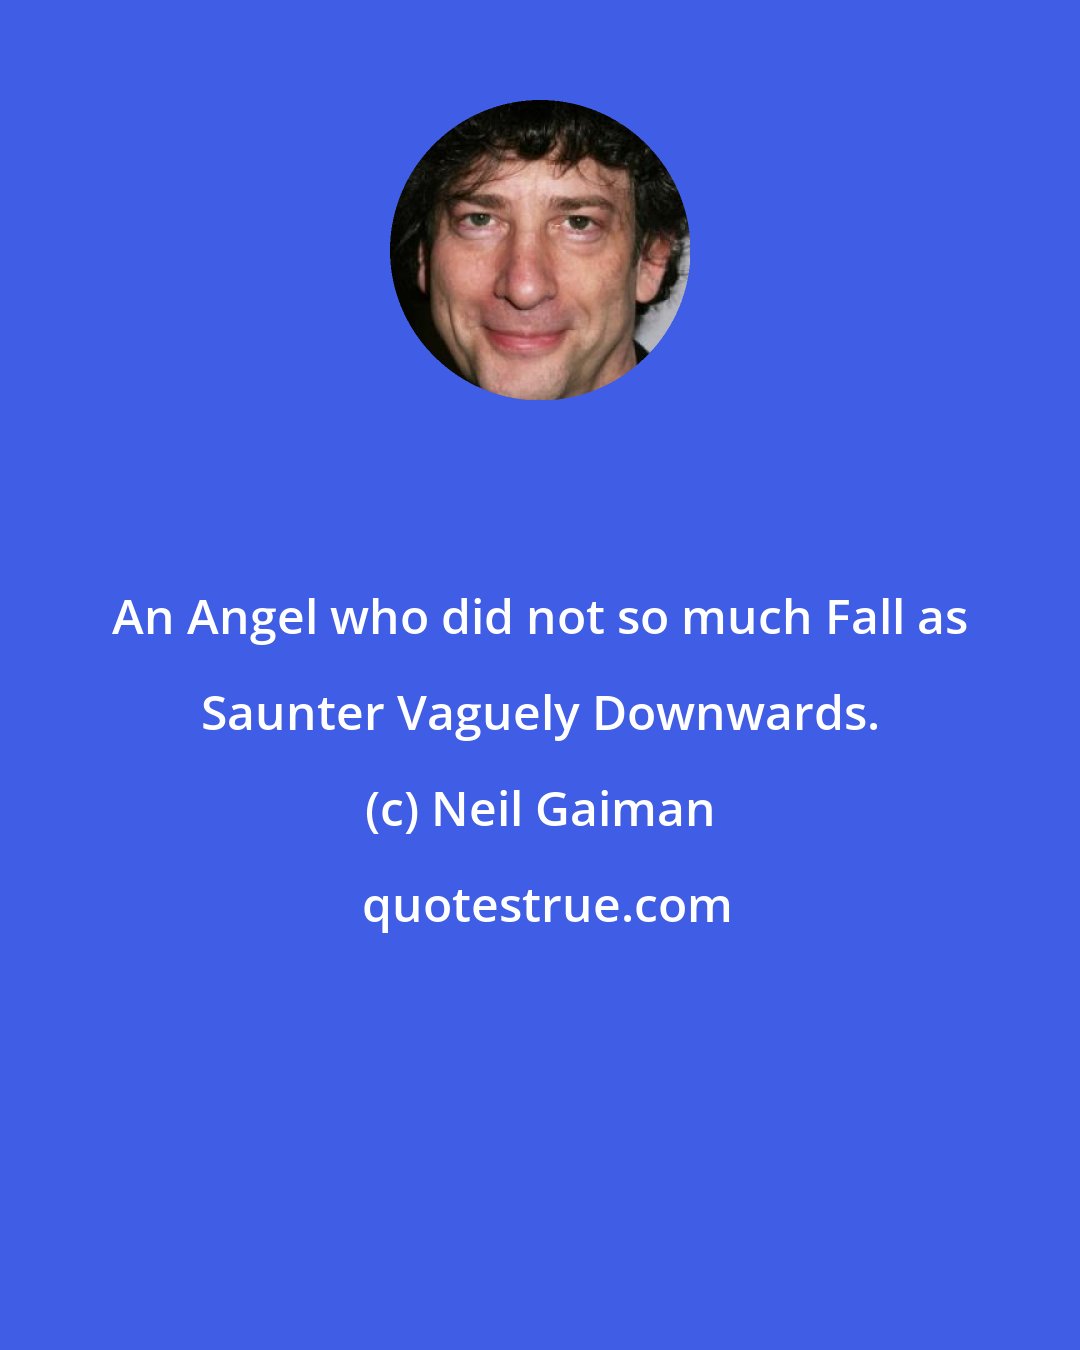 Neil Gaiman: An Angel who did not so much Fall as Saunter Vaguely Downwards.